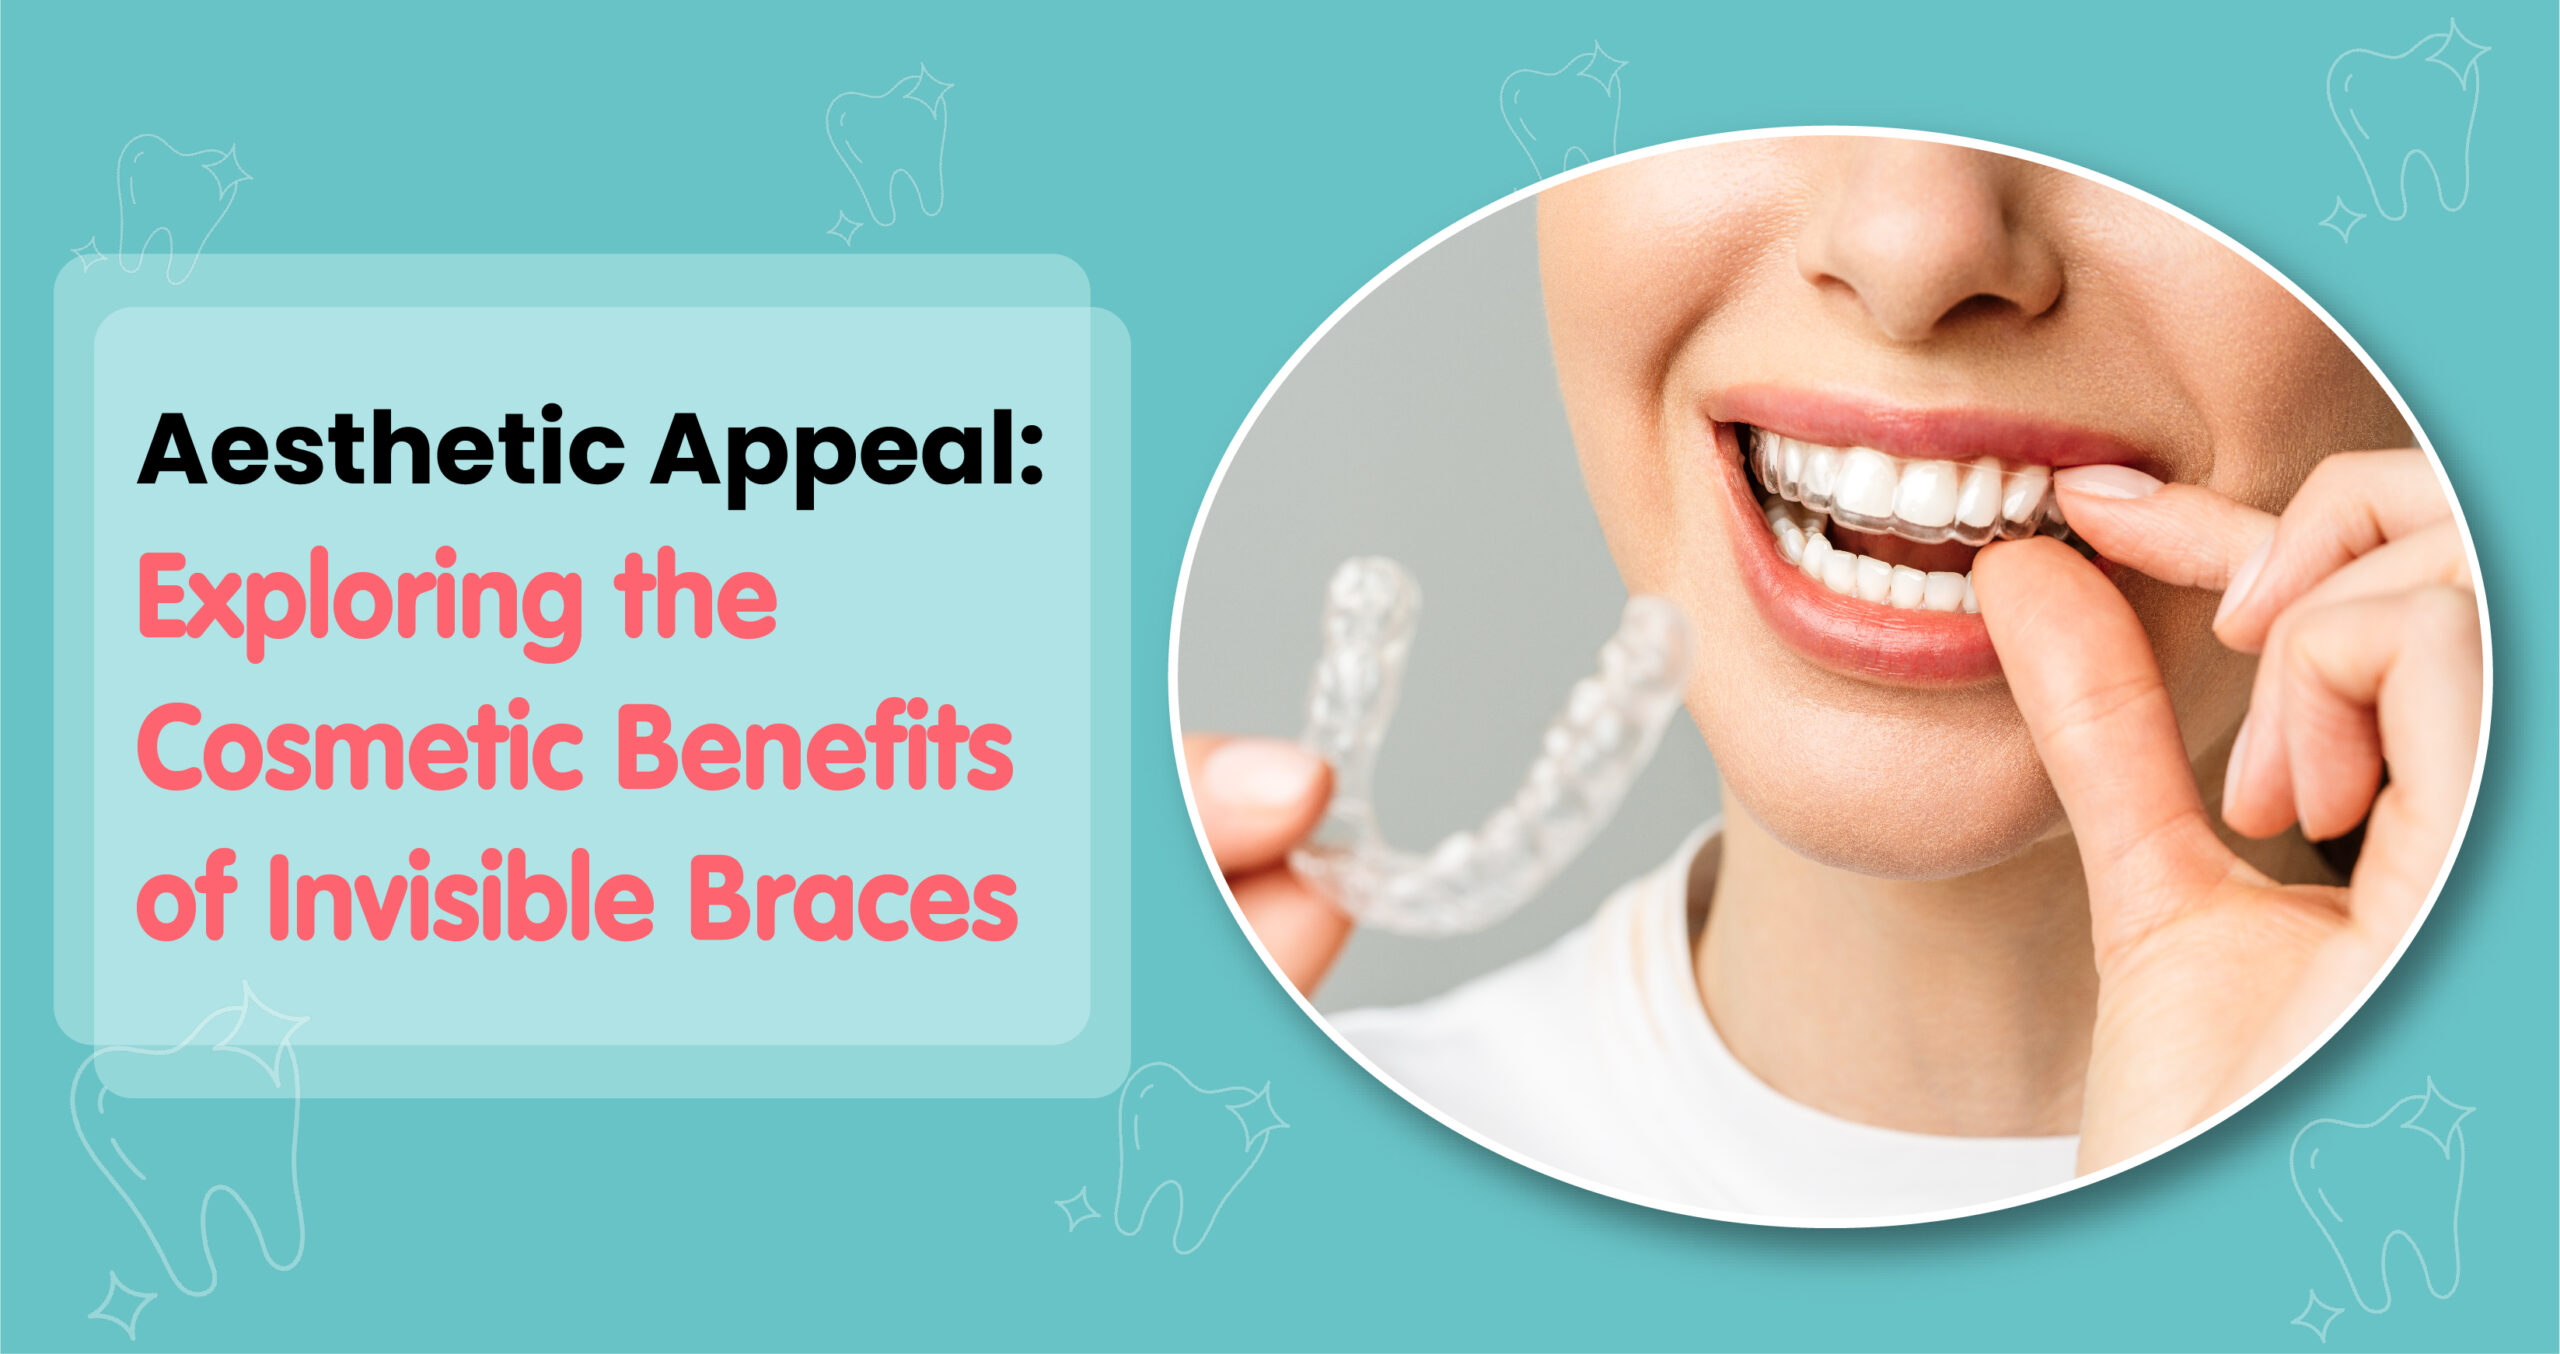 What are the Cosmetic Benefits of Invisible Braces